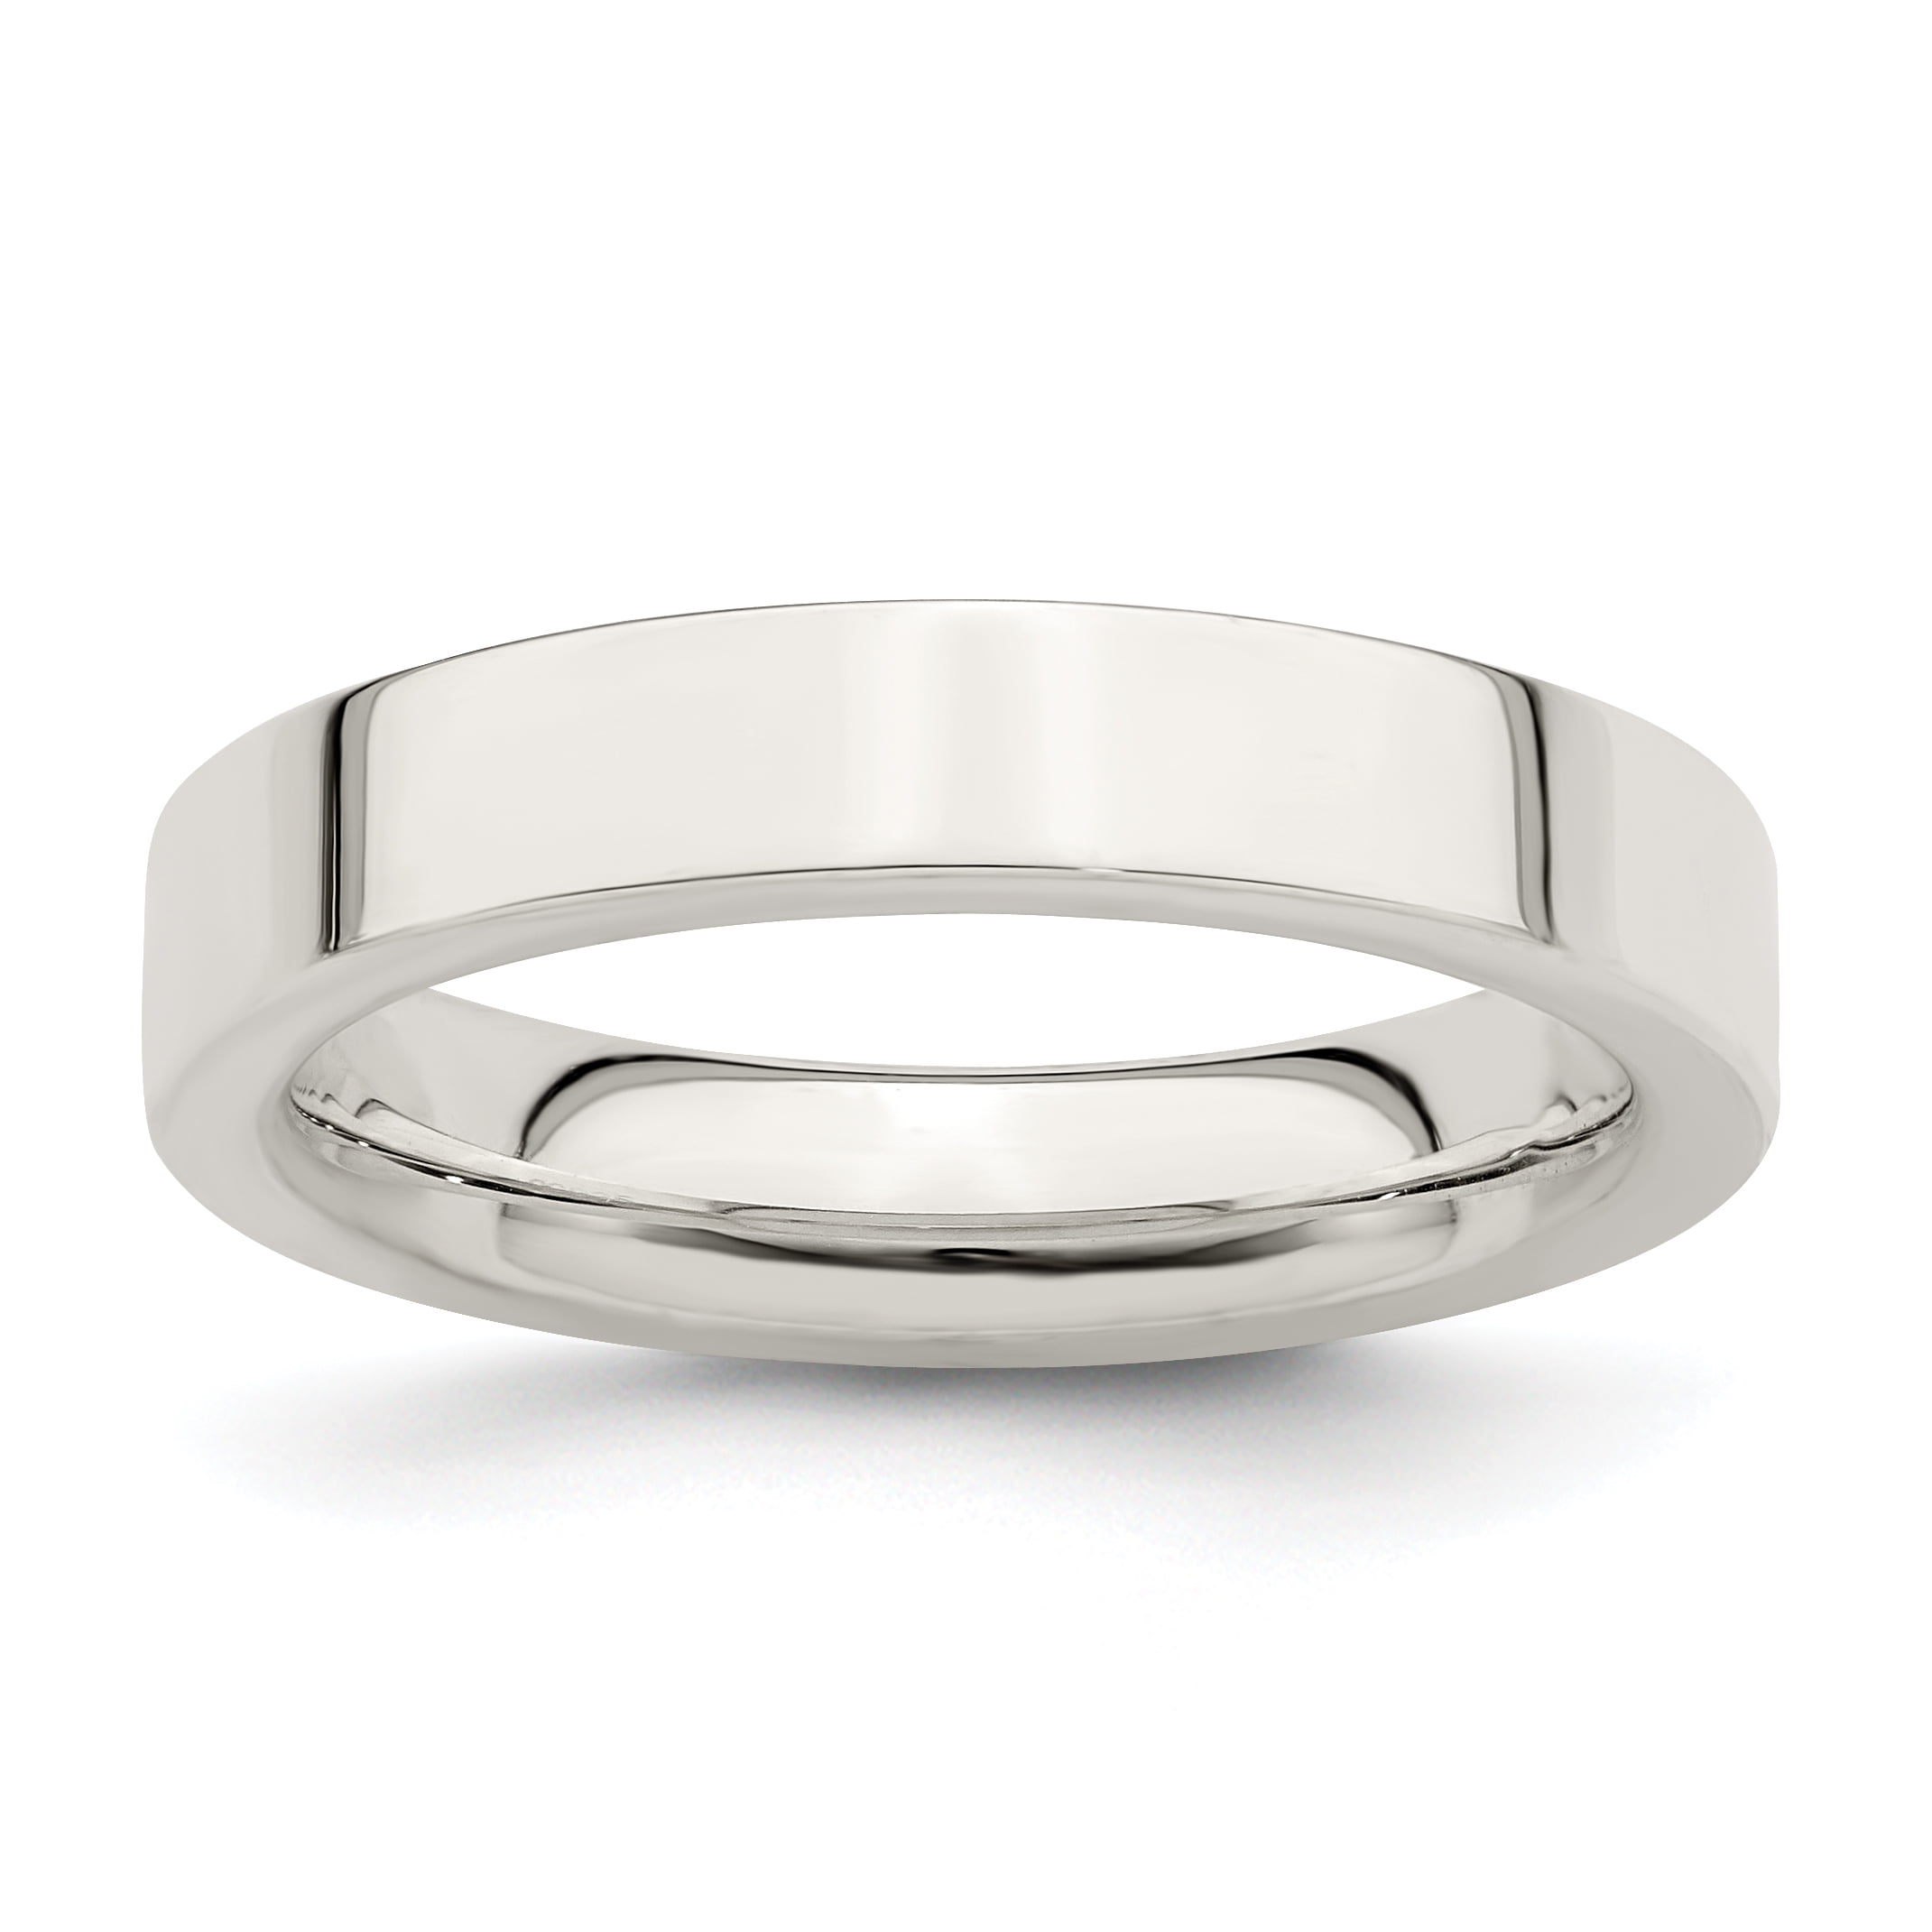 Sterling Silver 4mm Comfort Fit.5 Band Ring